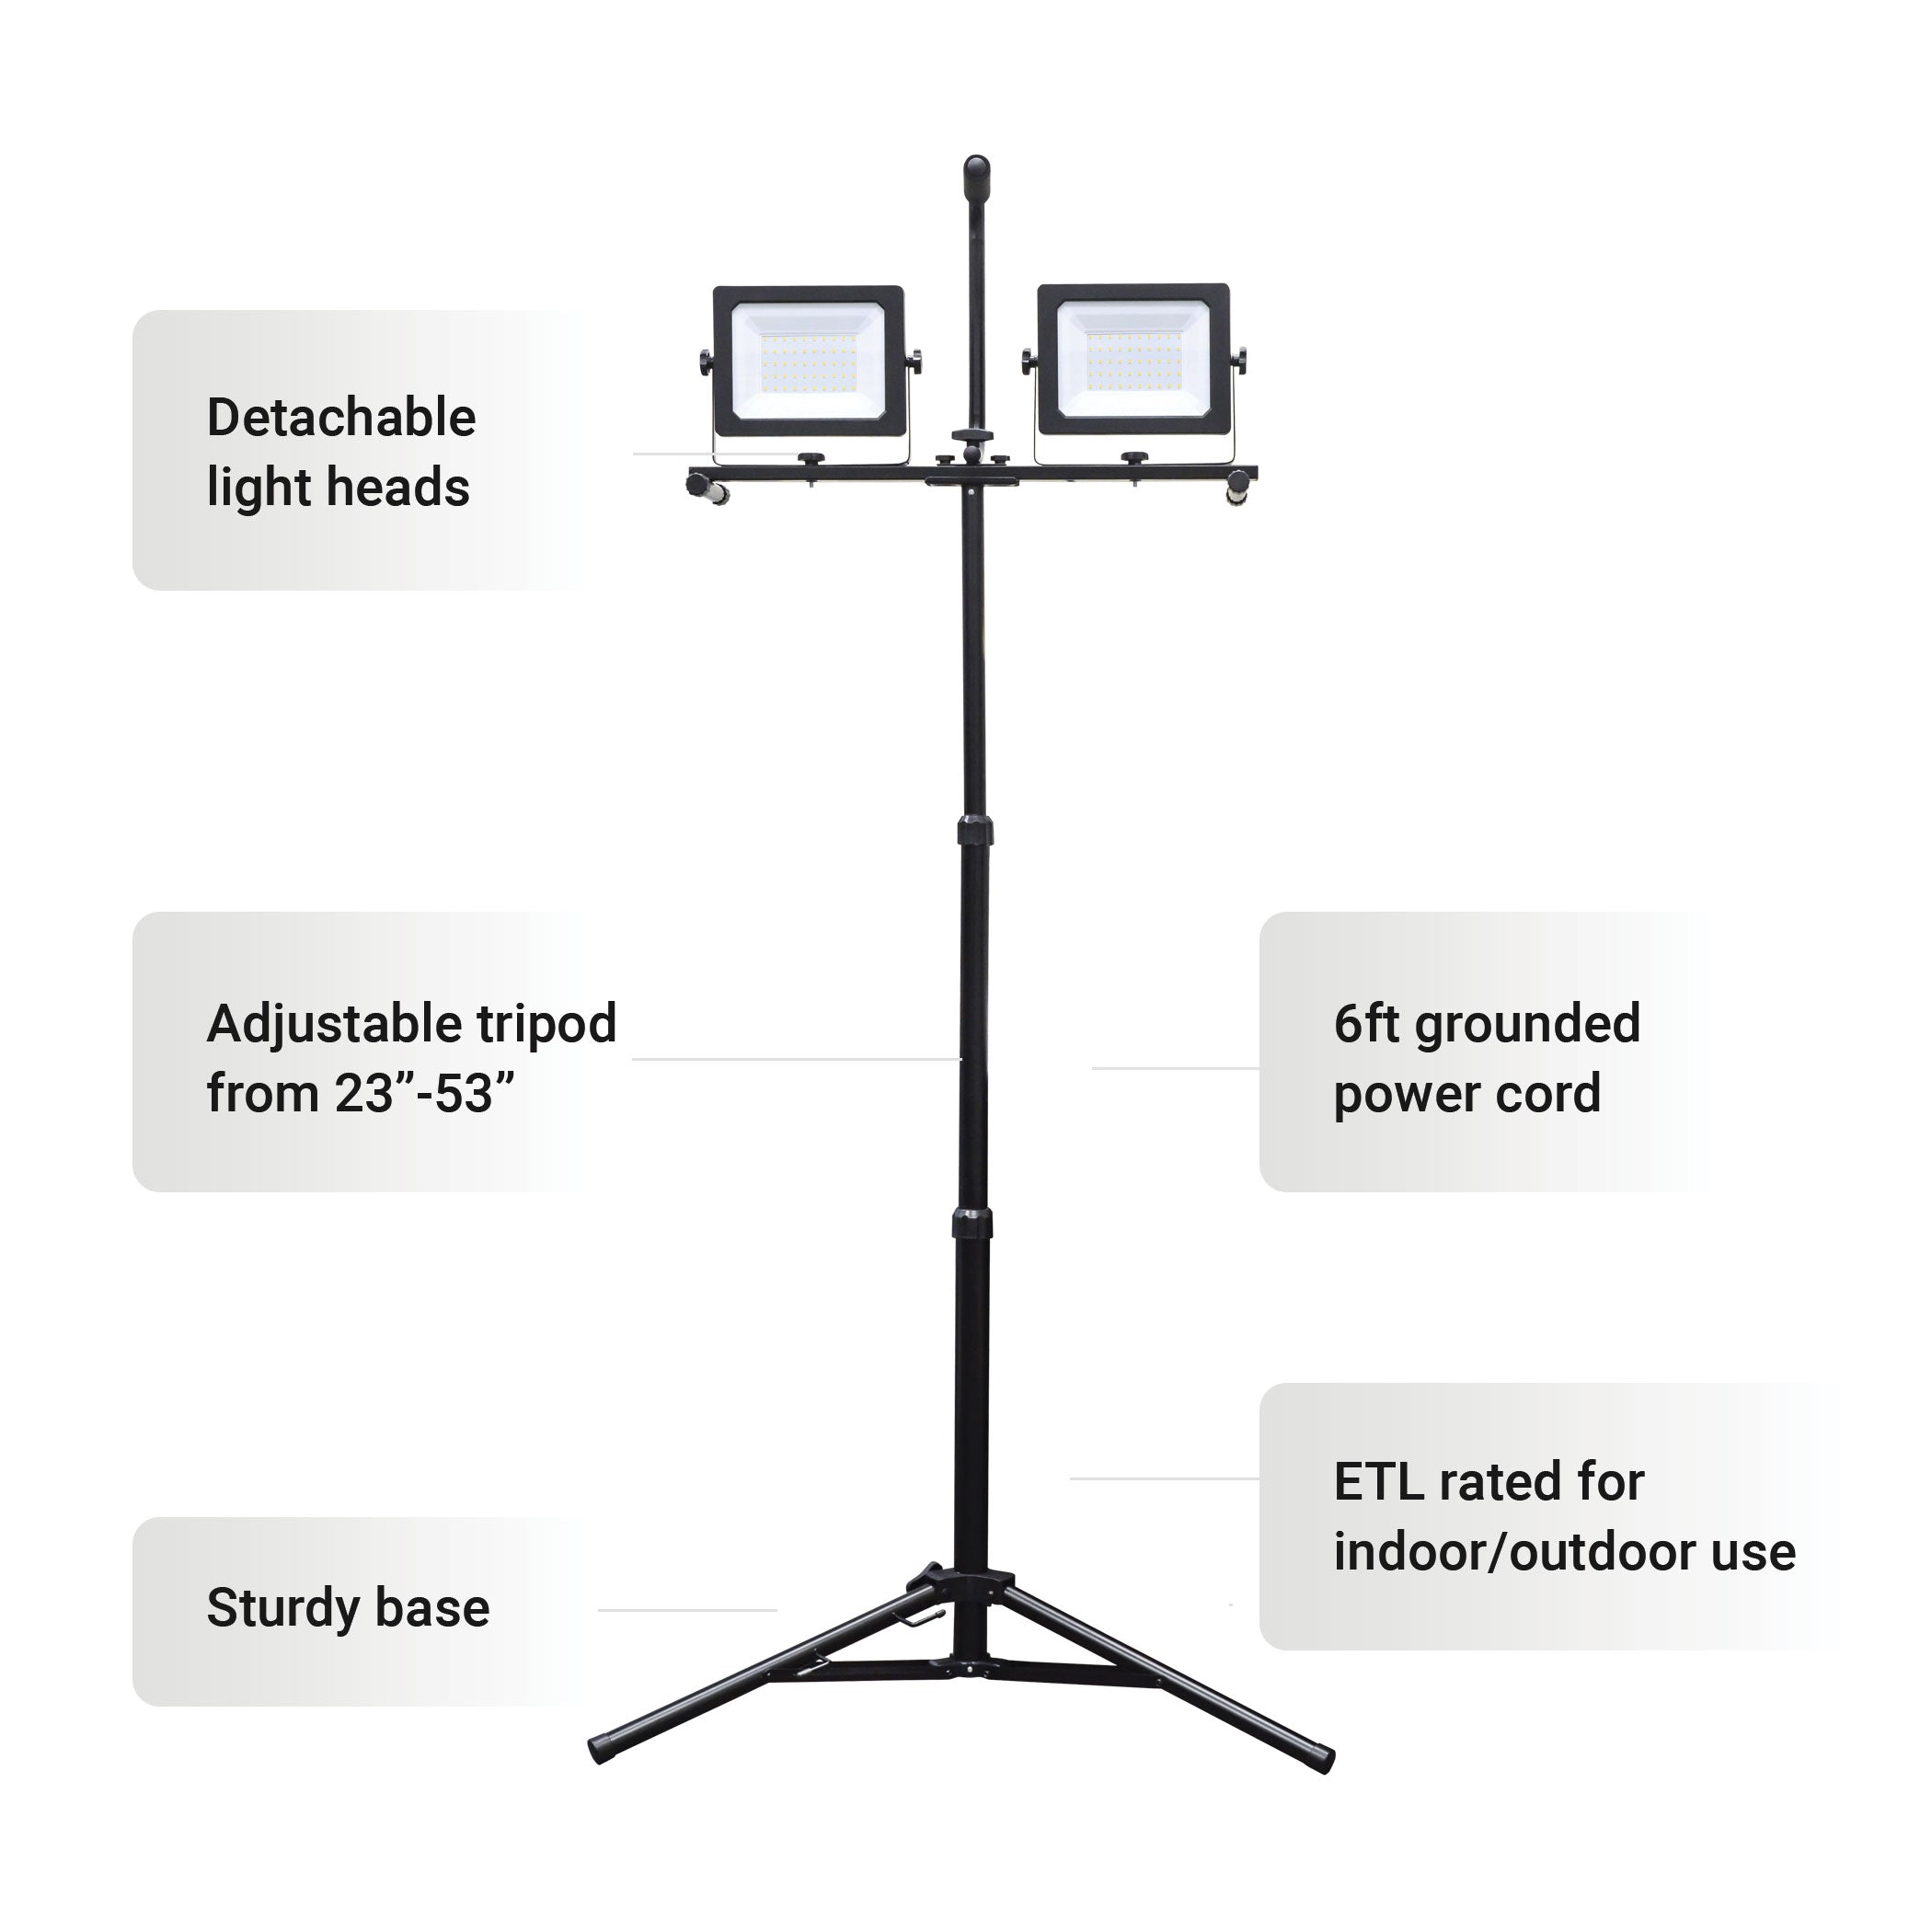 11200 Lumens 2-Head Tripod Light, LED Work Light with Stand,Portable  Outdoor Light, Remote, Waterproof, Only Work on 12V